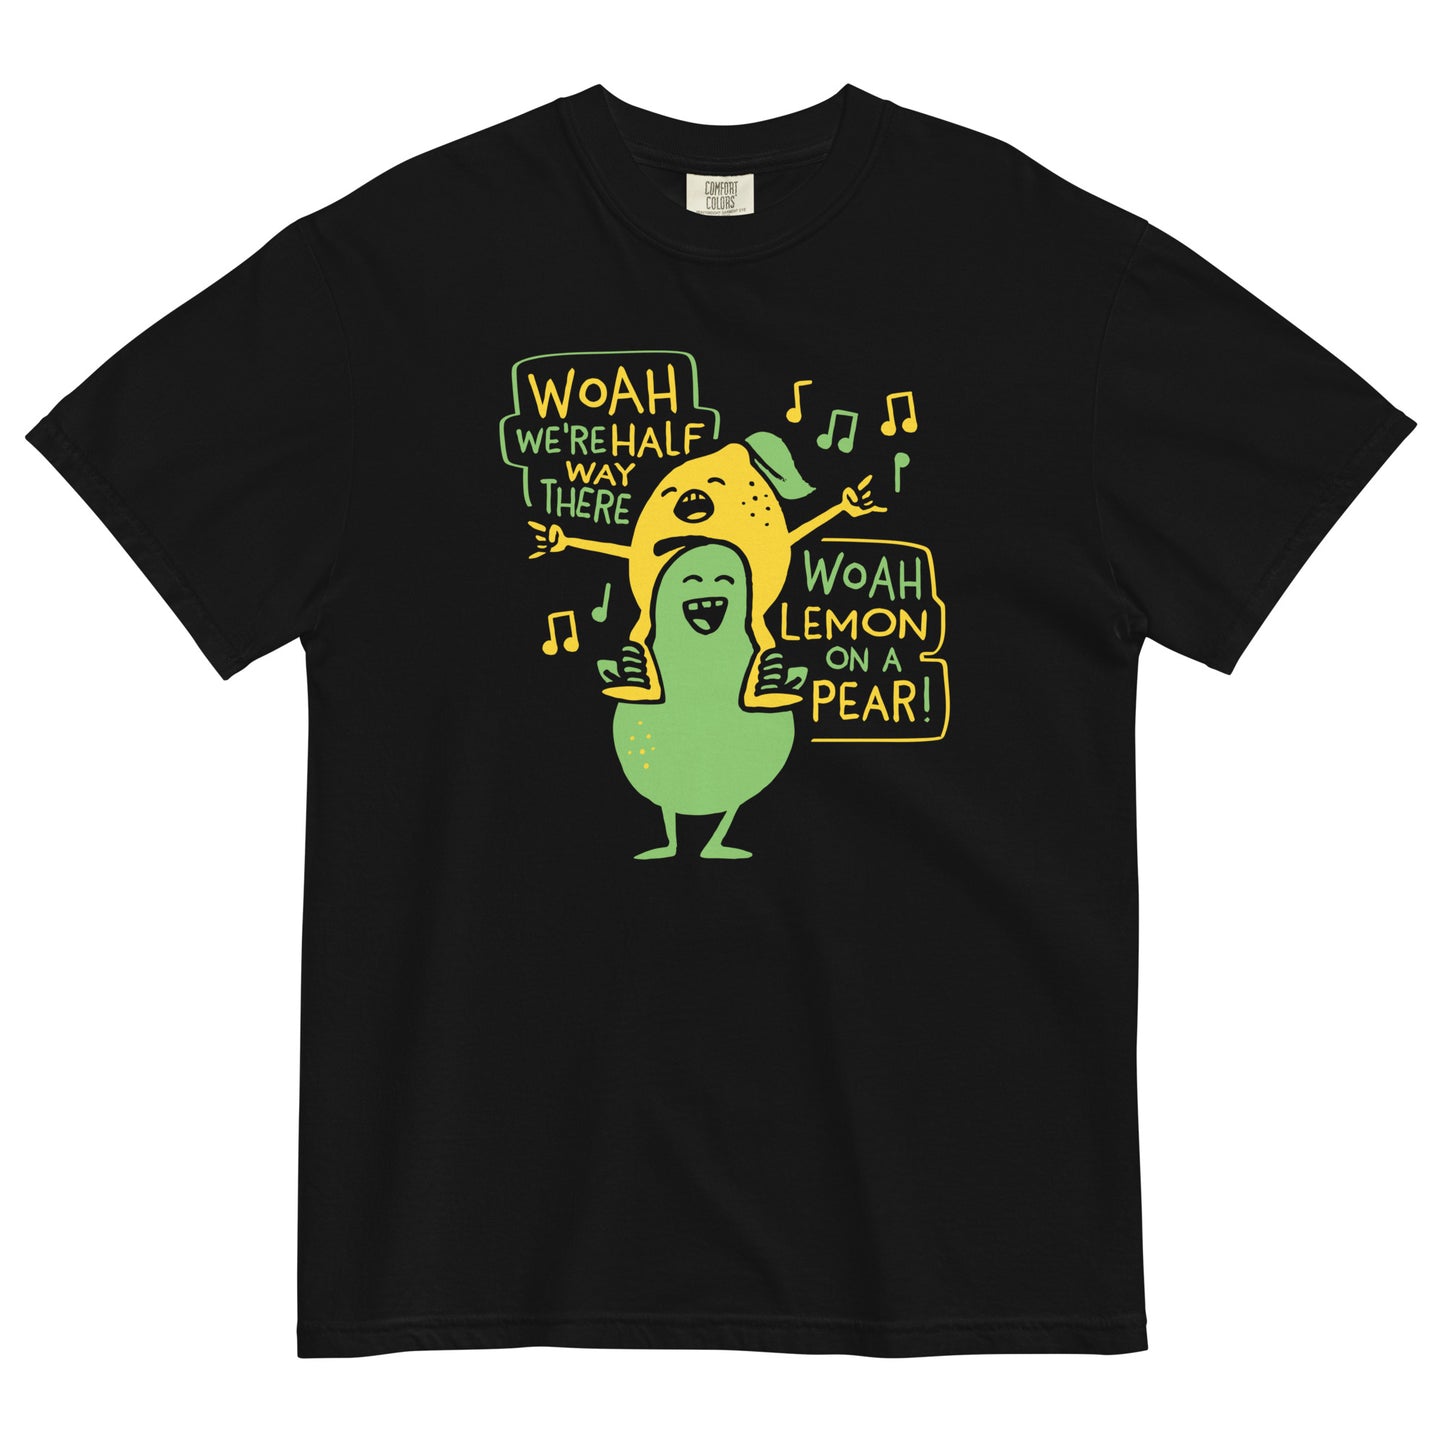 Lemon On A Pear Men's Relaxed Fit Tee